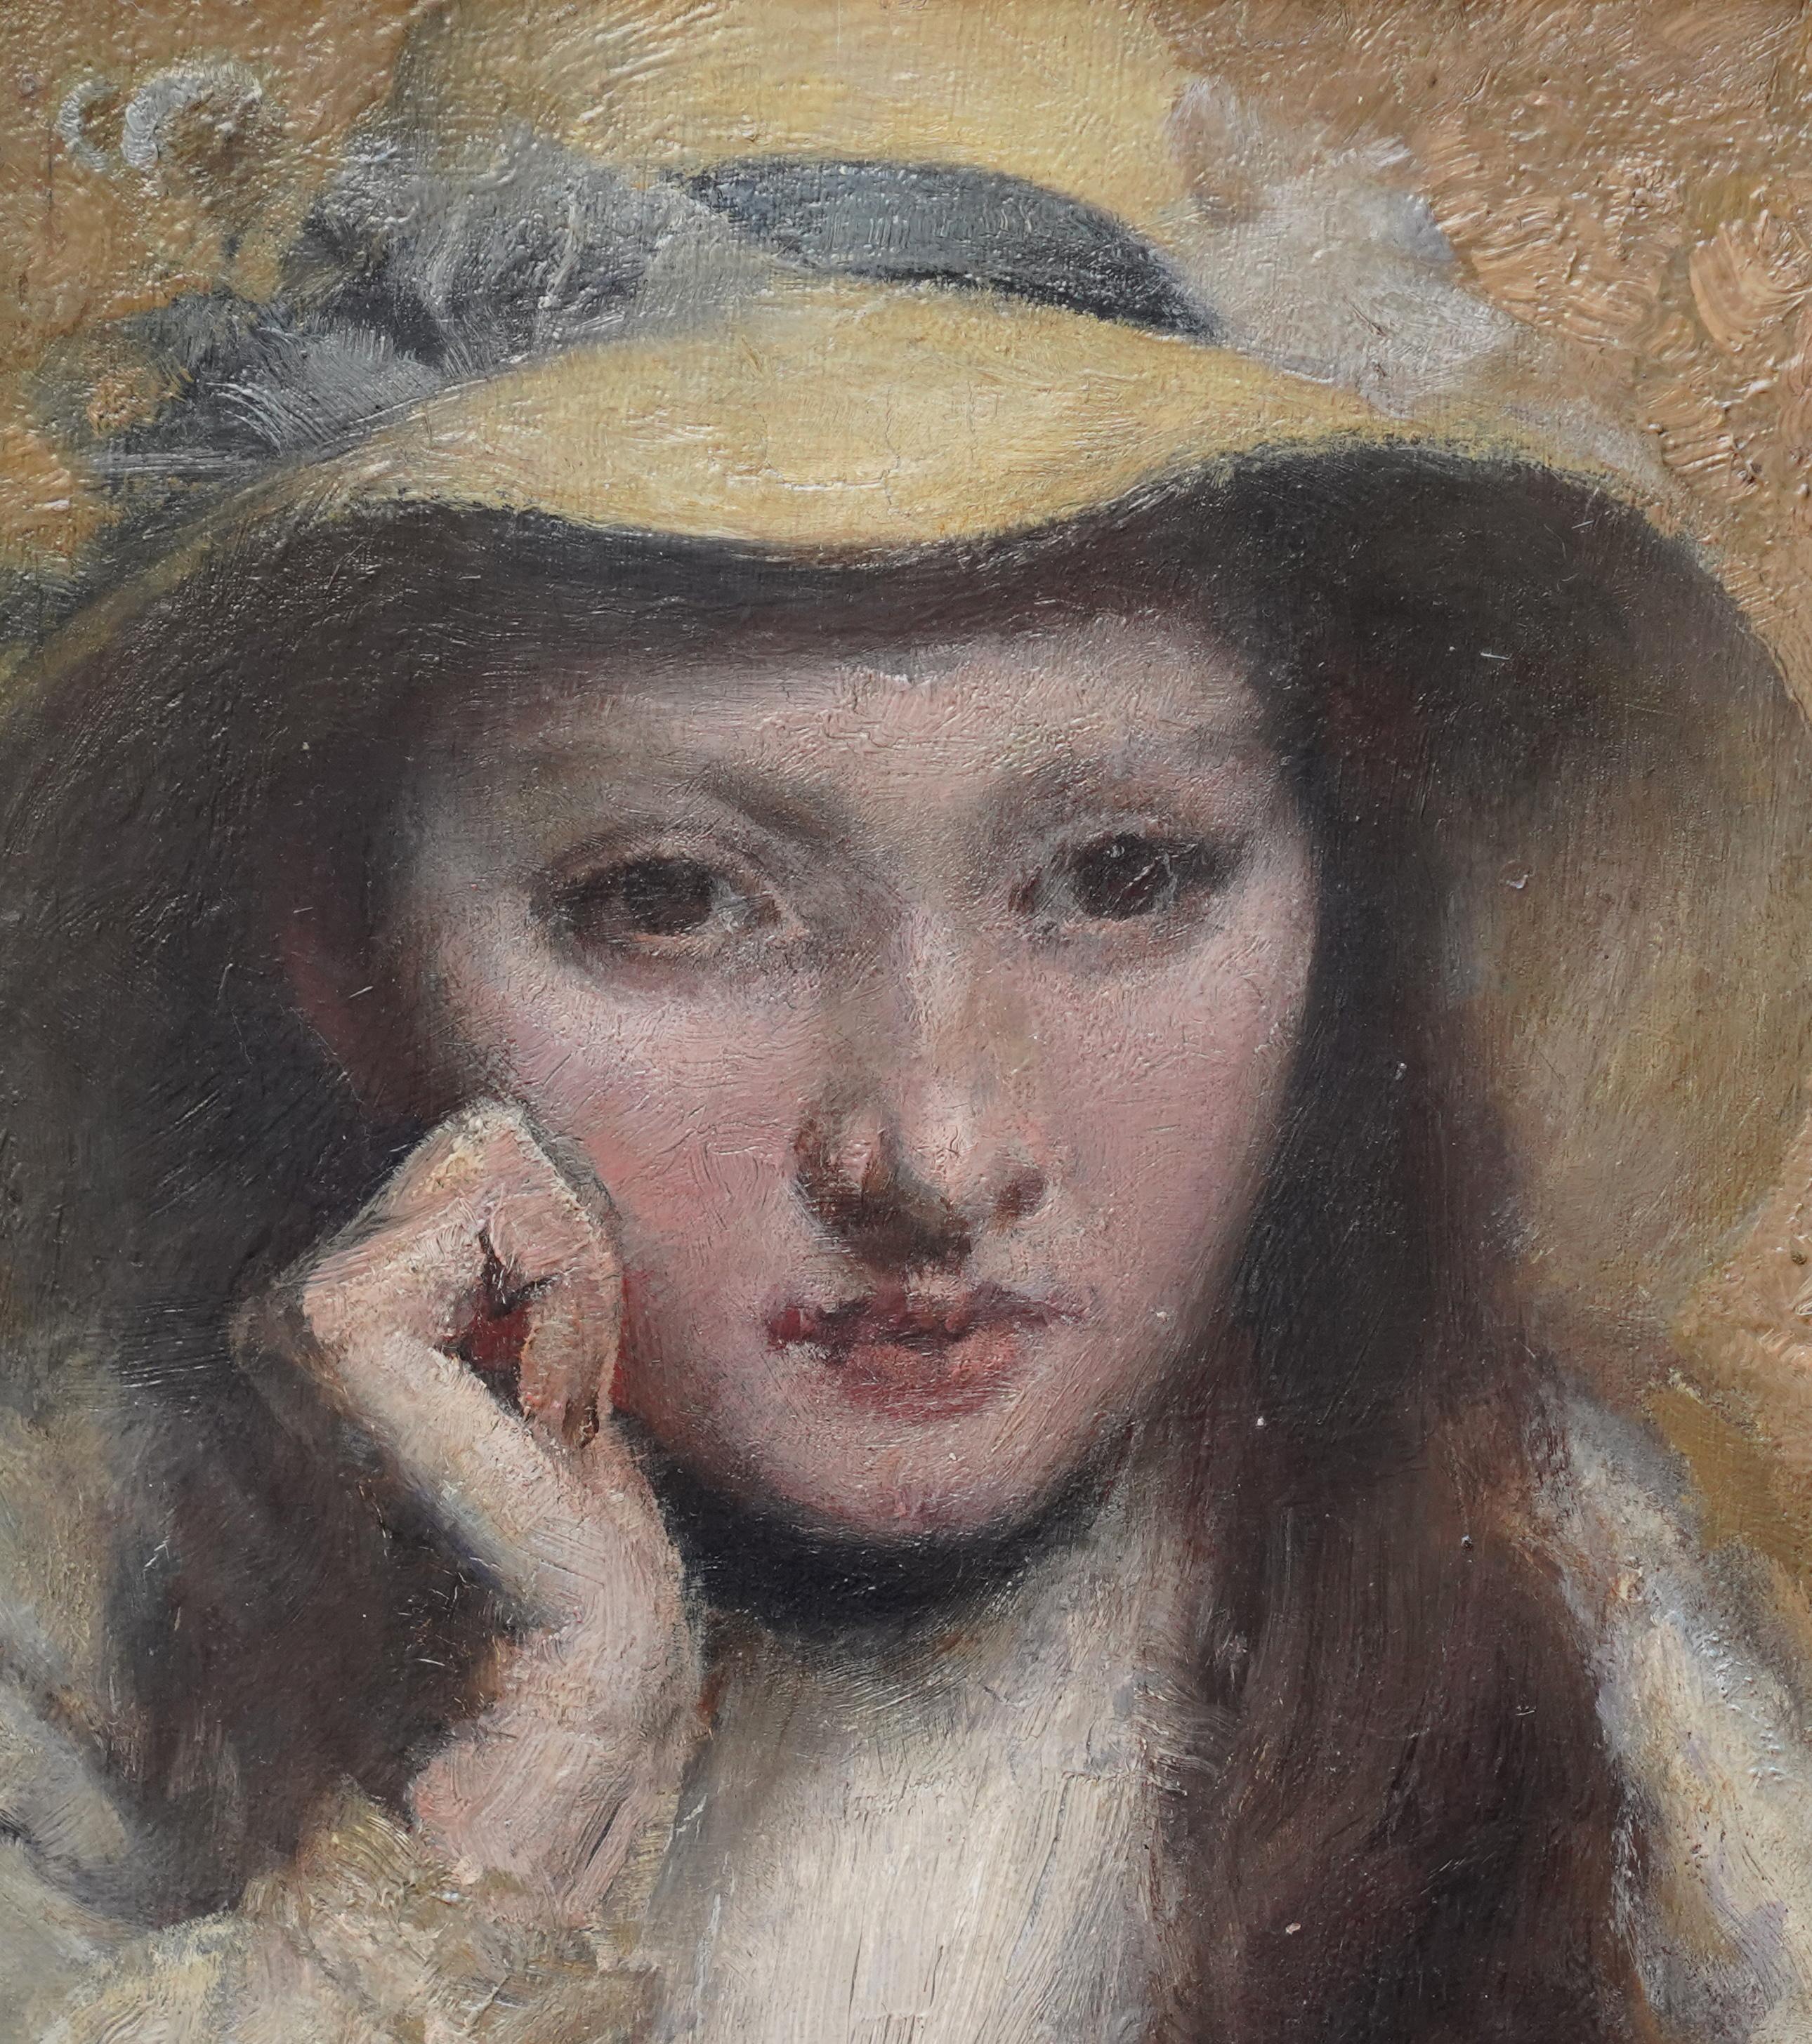 Newlyn School, circle of Frank Bramley is the attribution for this lovely Victorian portrait oil painting. Painted circa 1890 on panel, it is a head and shoulders portrait of a young girl in a straw hat. There is strong brushwork and good heavy